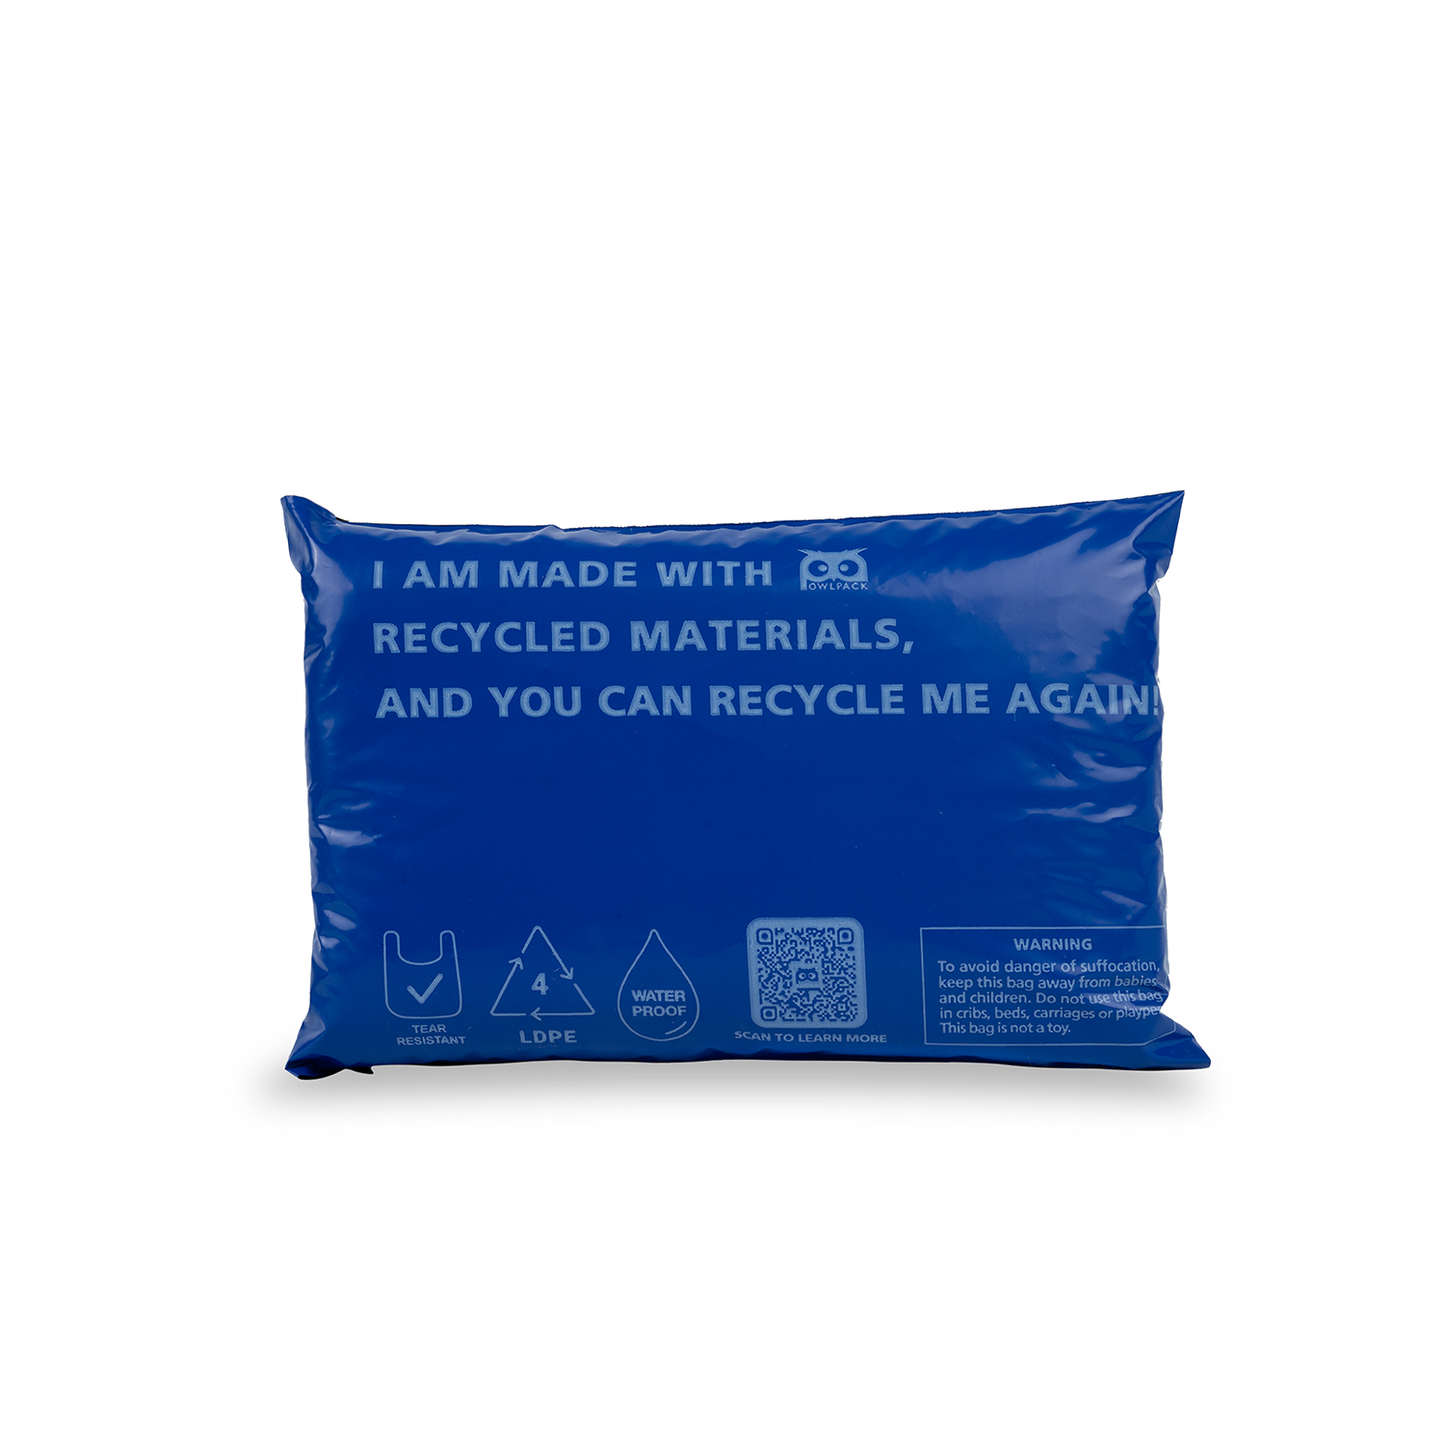 Owlpack Eco Friendly Recycled Mailers( Blue, Size 5x7, 6x9)